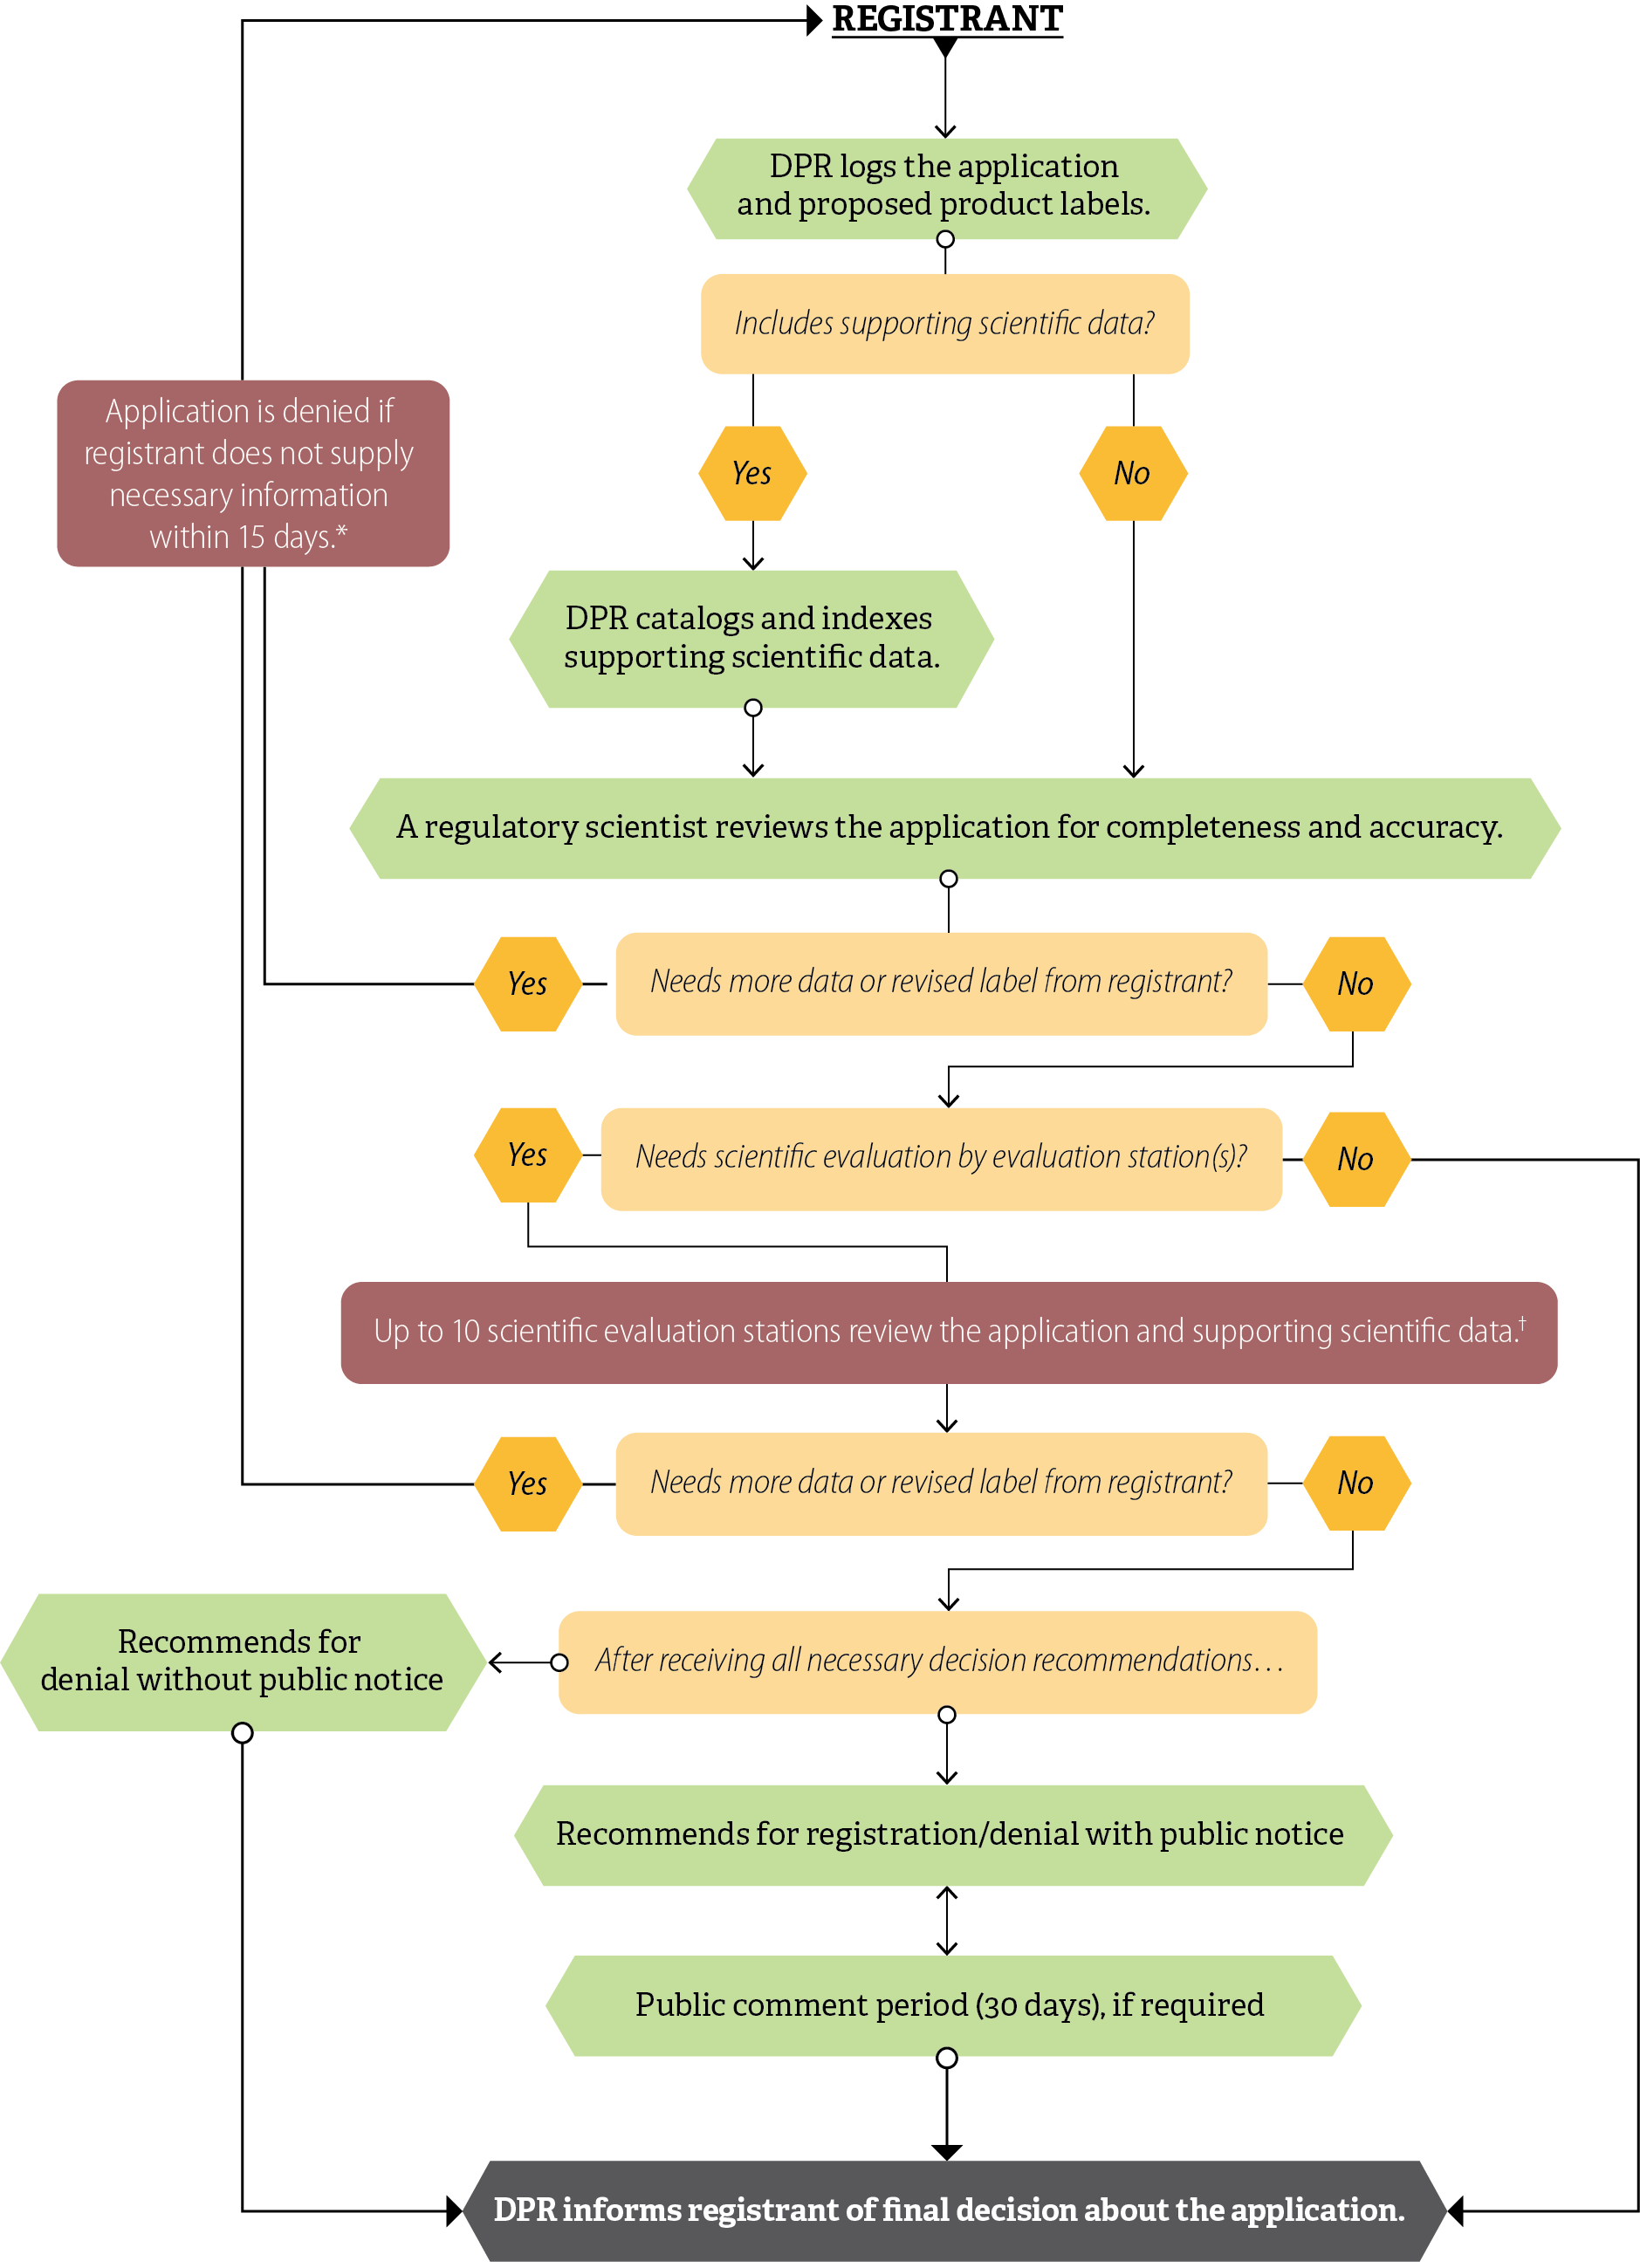 A flowchart representing the process an application for pesticide registration goes through from submission to DPR’s decision. This includes cataloging and indexing the scientific data that accompany the application, routing the application through scientific evaluation, and submitting the proposed pesticide for public comment.